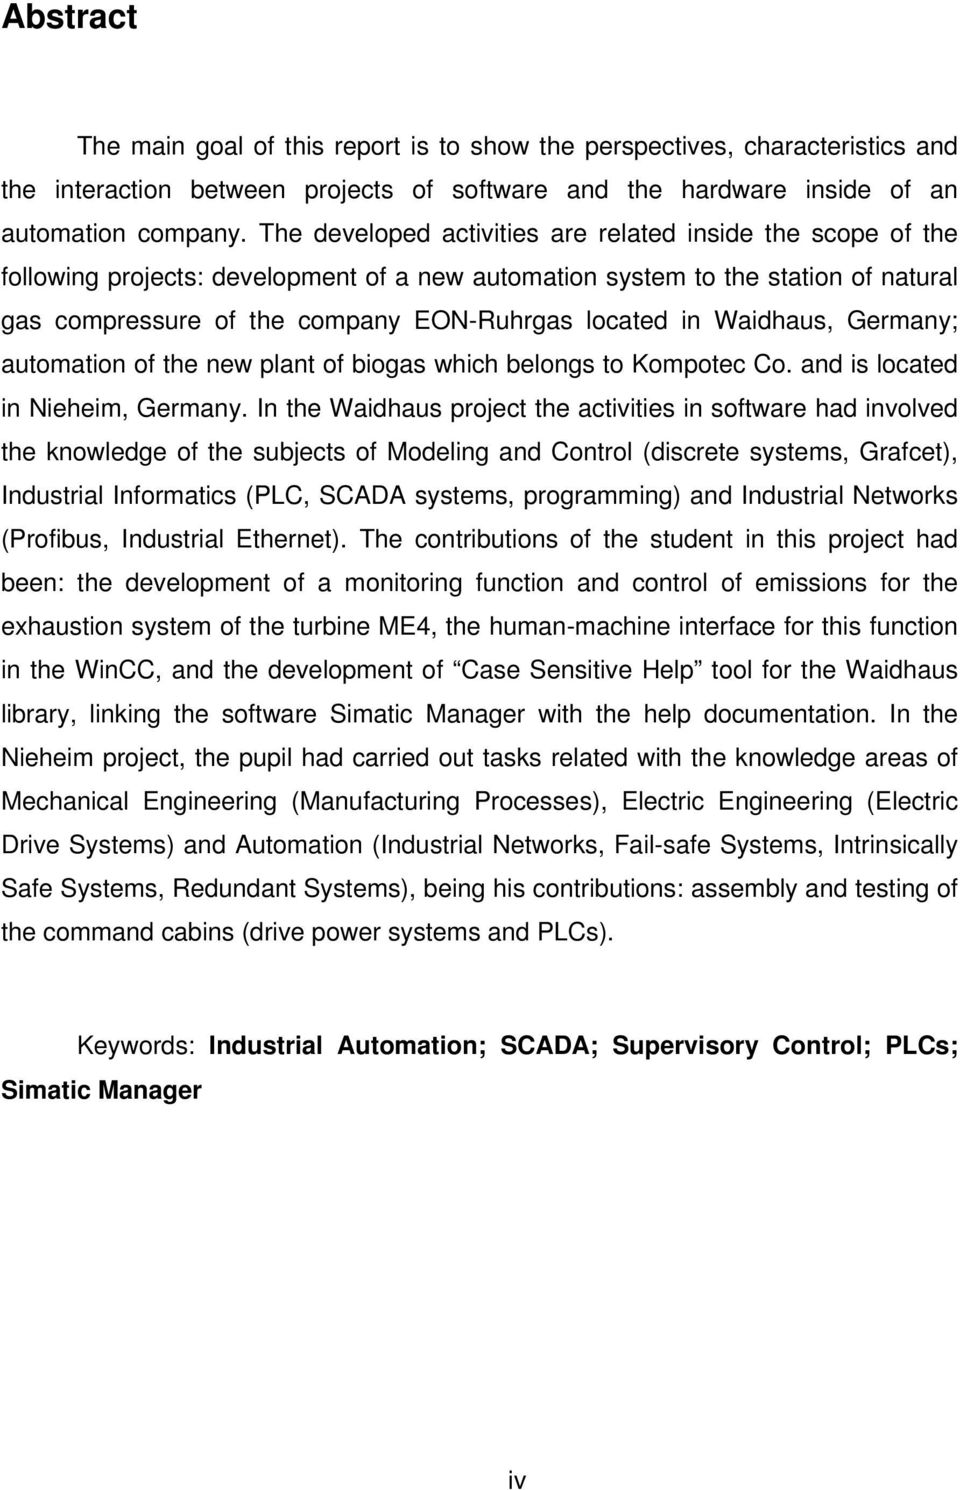 Waidhaus, Germany; automation of the new plant of biogas which belongs to Kompotec Co. and is located in Nieheim, Germany.